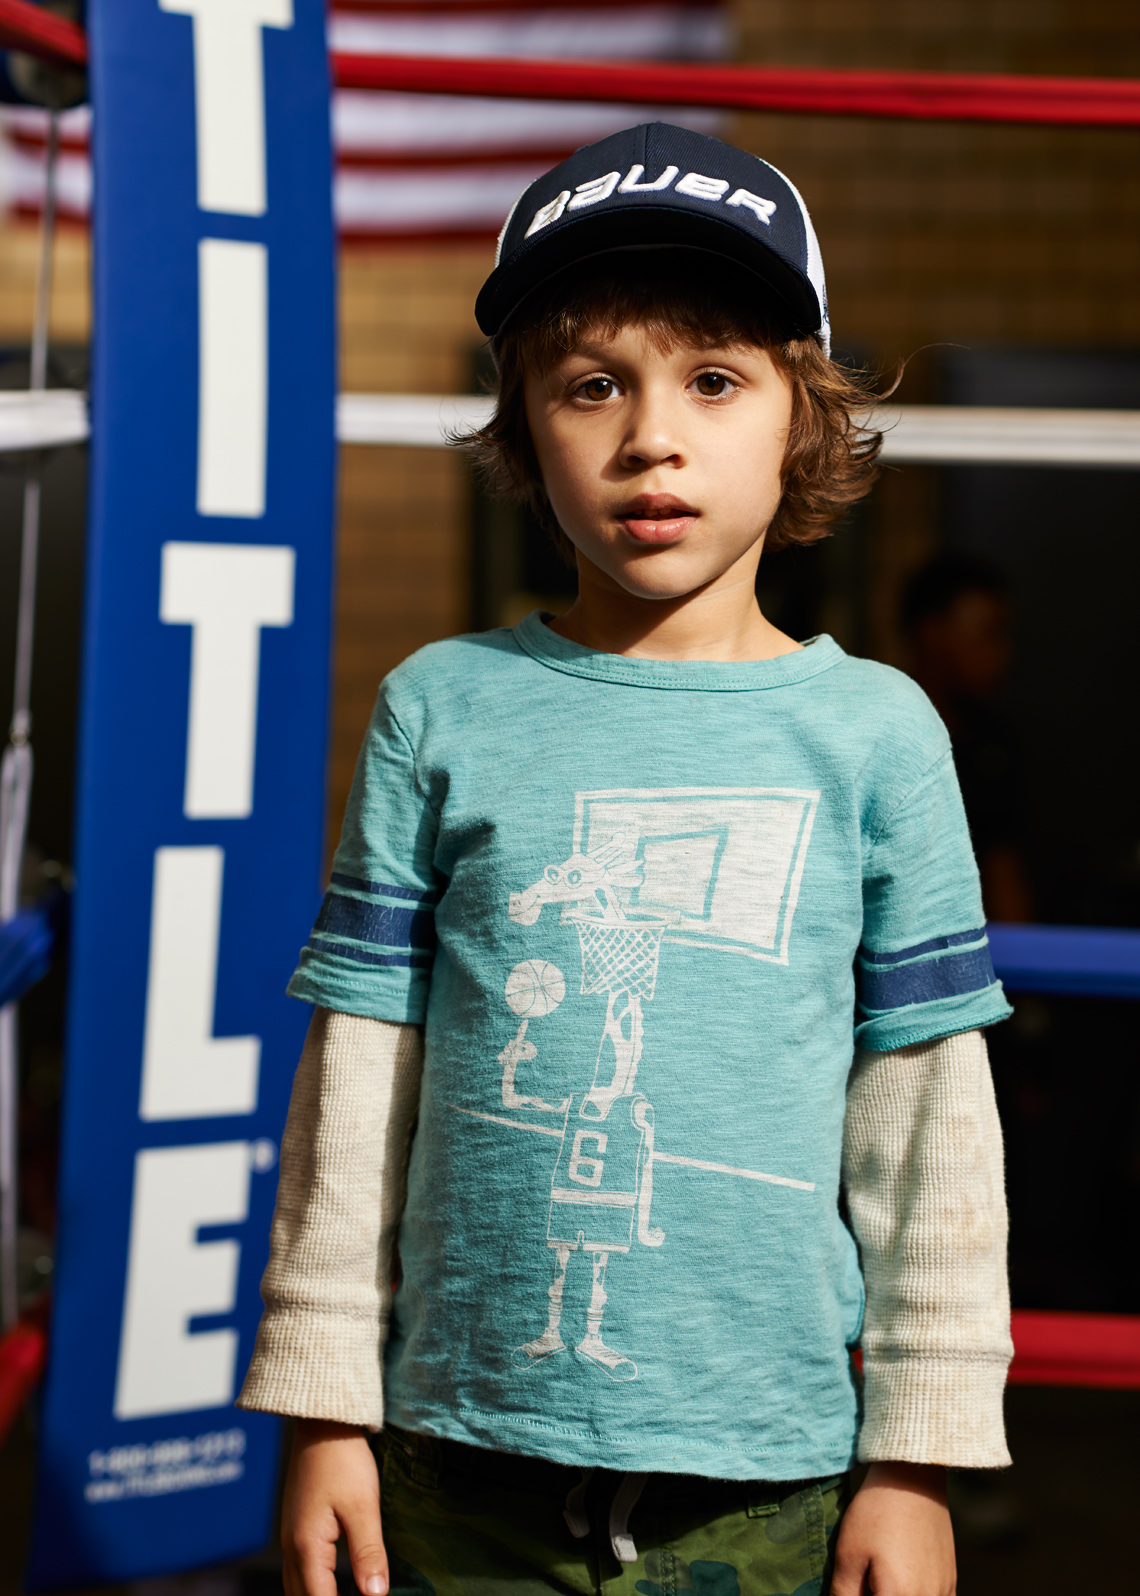 Little boy in the boxing ring